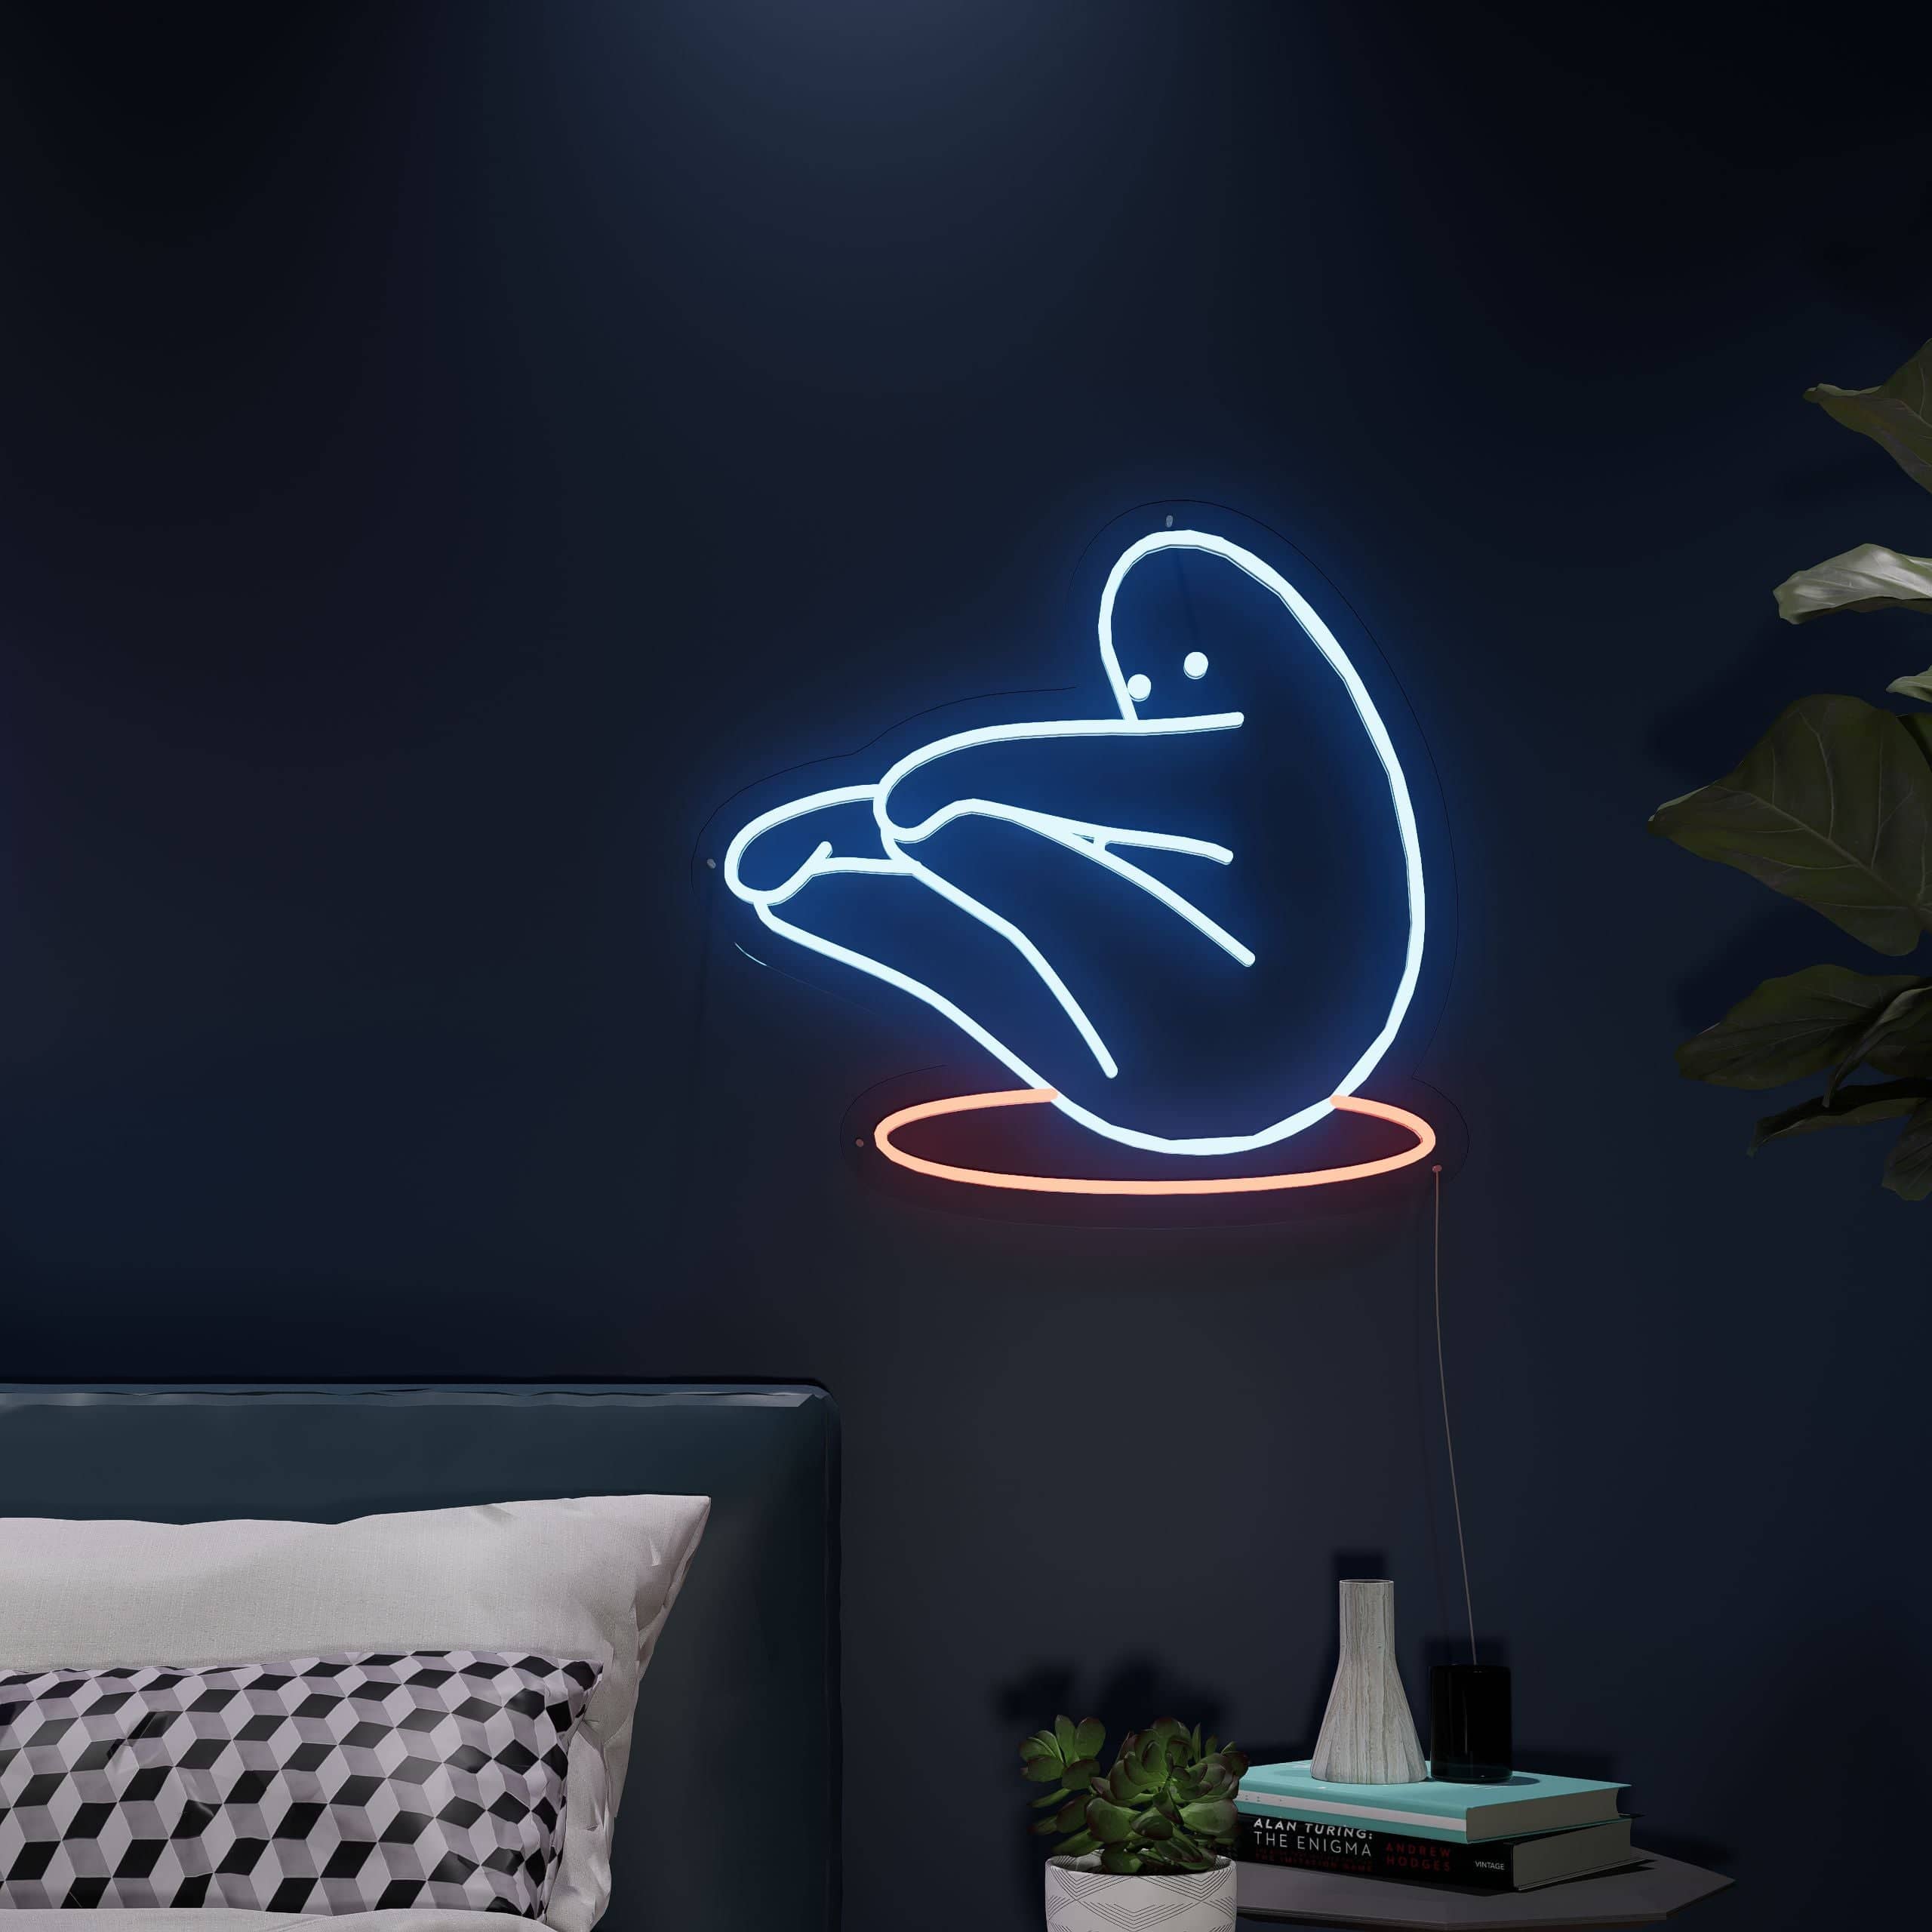 Energize your space with gym neon decor